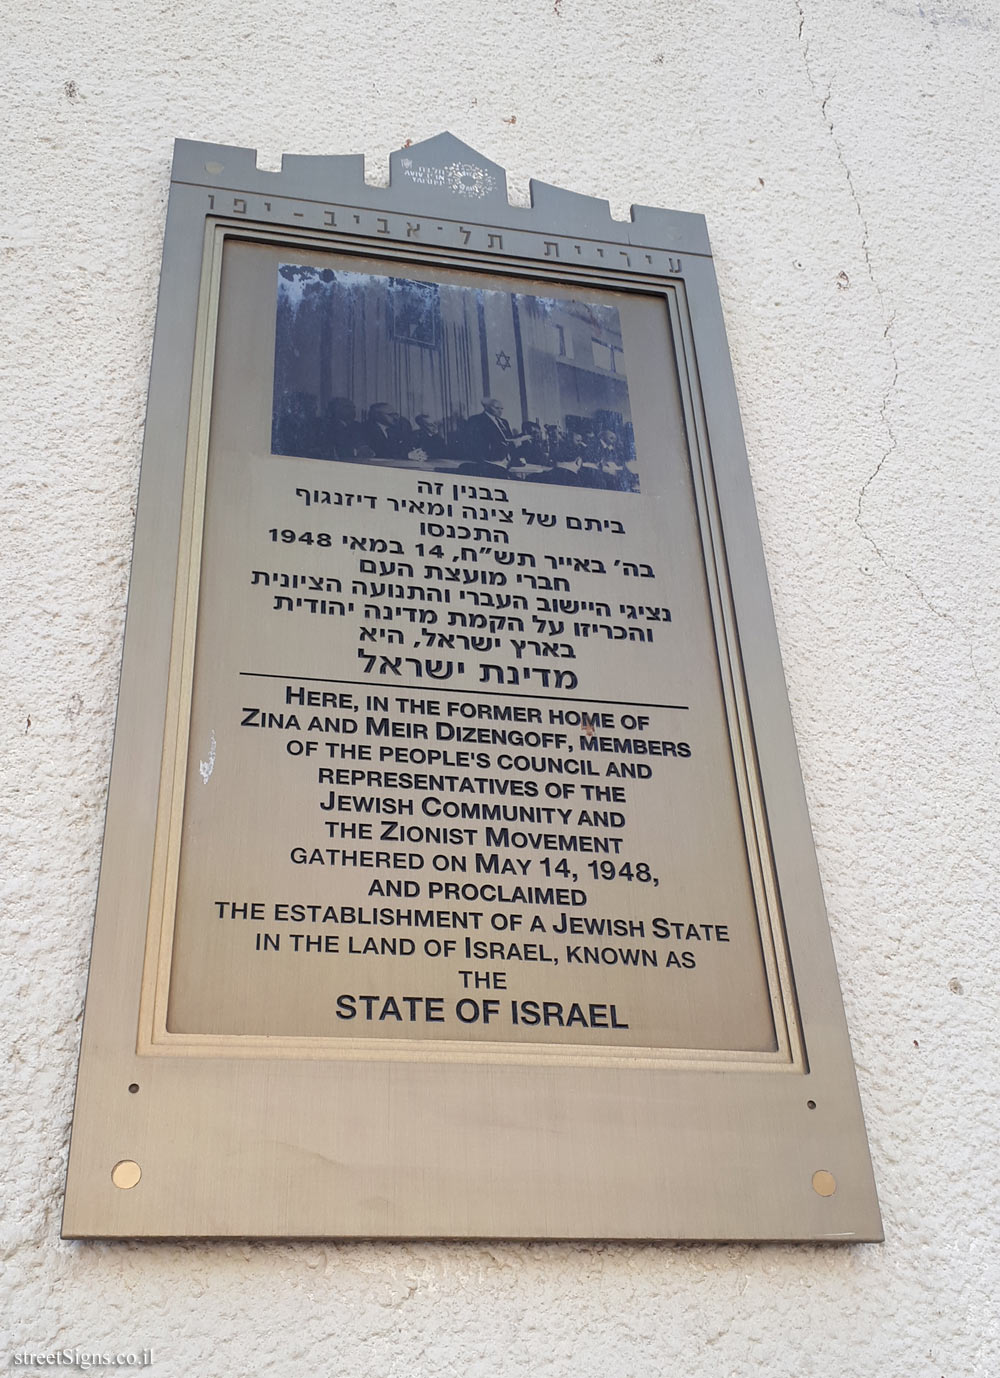 Tel Aviv - Independence Hall - Place of Declaration of the State of Israel